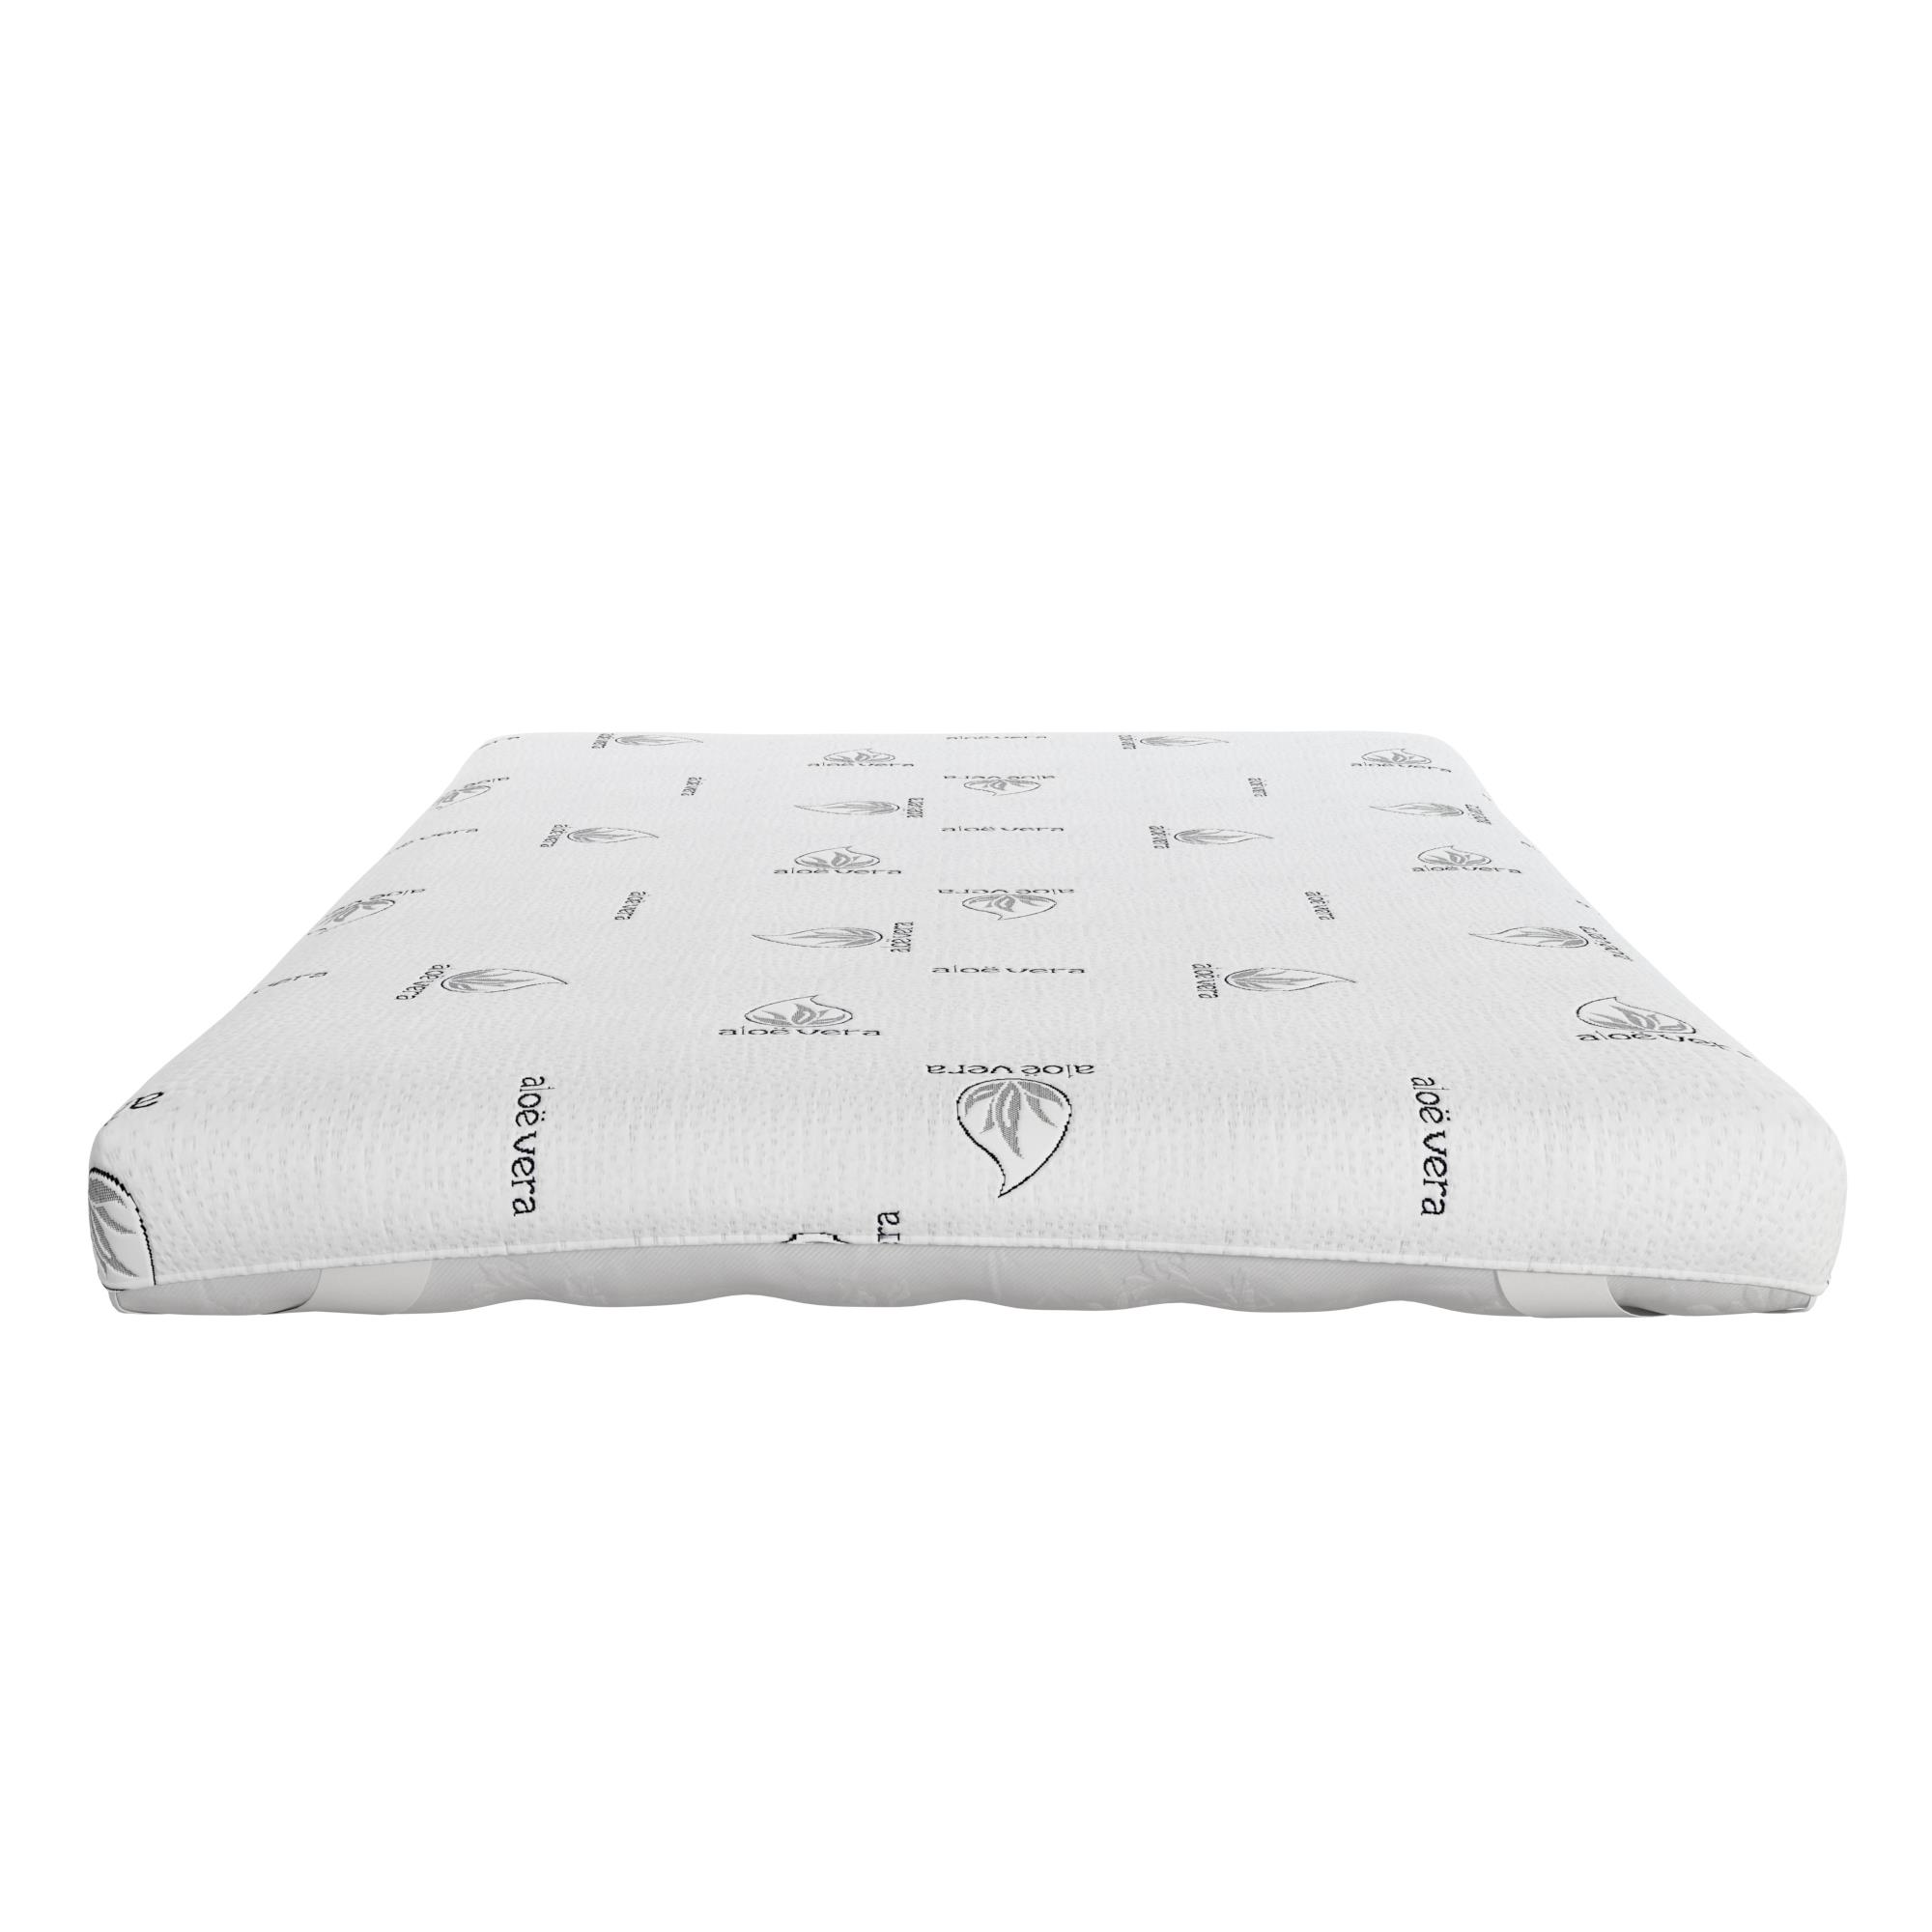 Signature Sleep Honest Elements 7 Natural Wool Mattress with Organic Cotton and Micro Coils, Full Size, [bed_full] - image 2 of 23